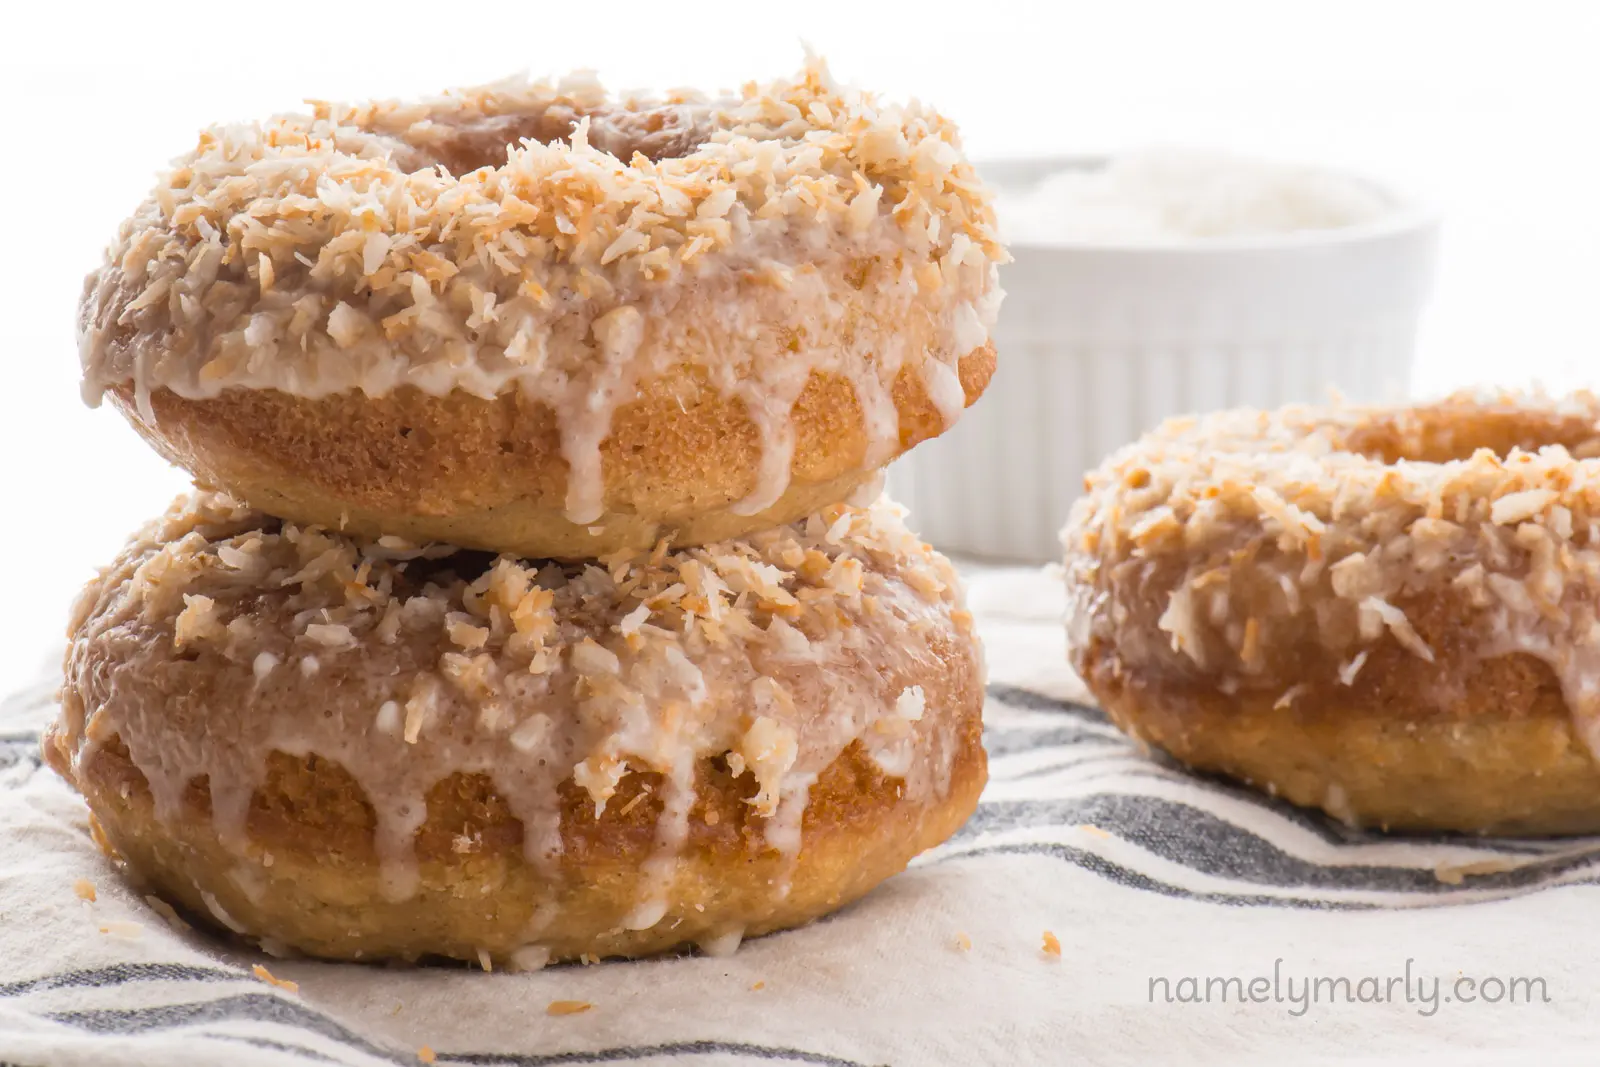 A stack of two Vegan Baked Toasted Coconut Donuts is sitting beside another donut, with a bowl of coconut flakes behind it.